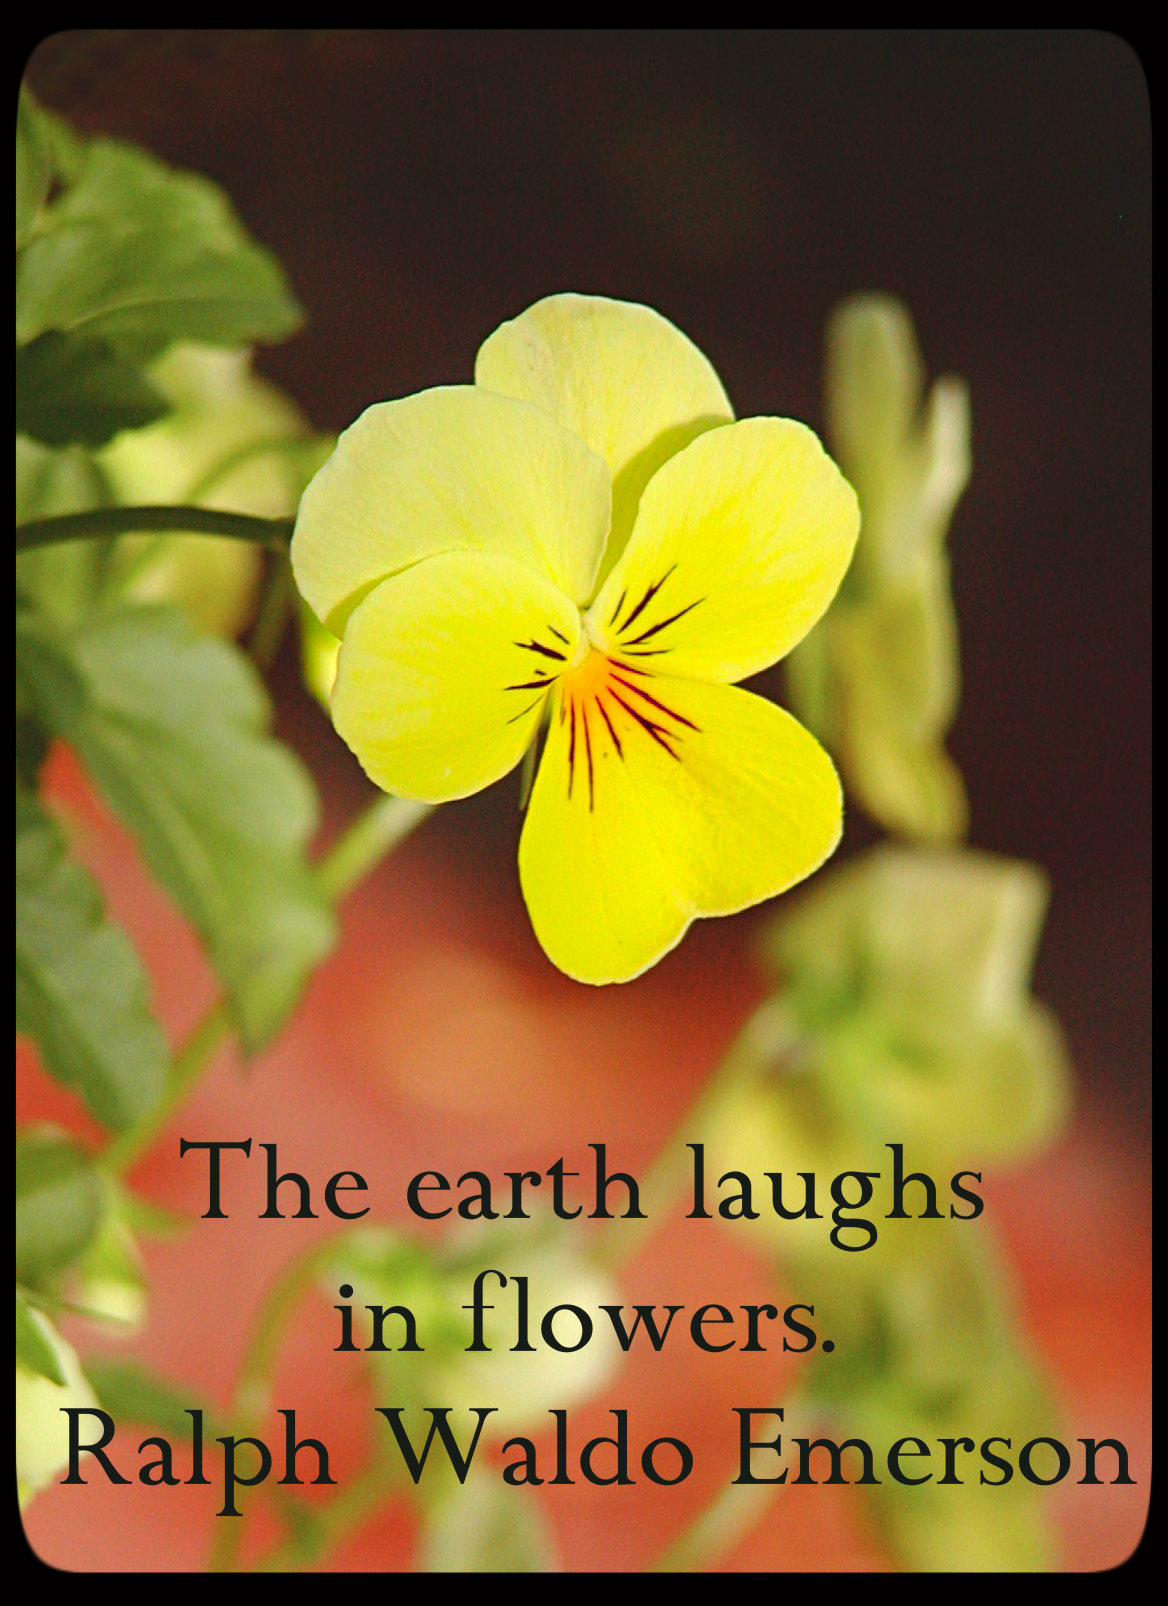 The earth laughs in flowers. ~Ralph Waldo Emerson